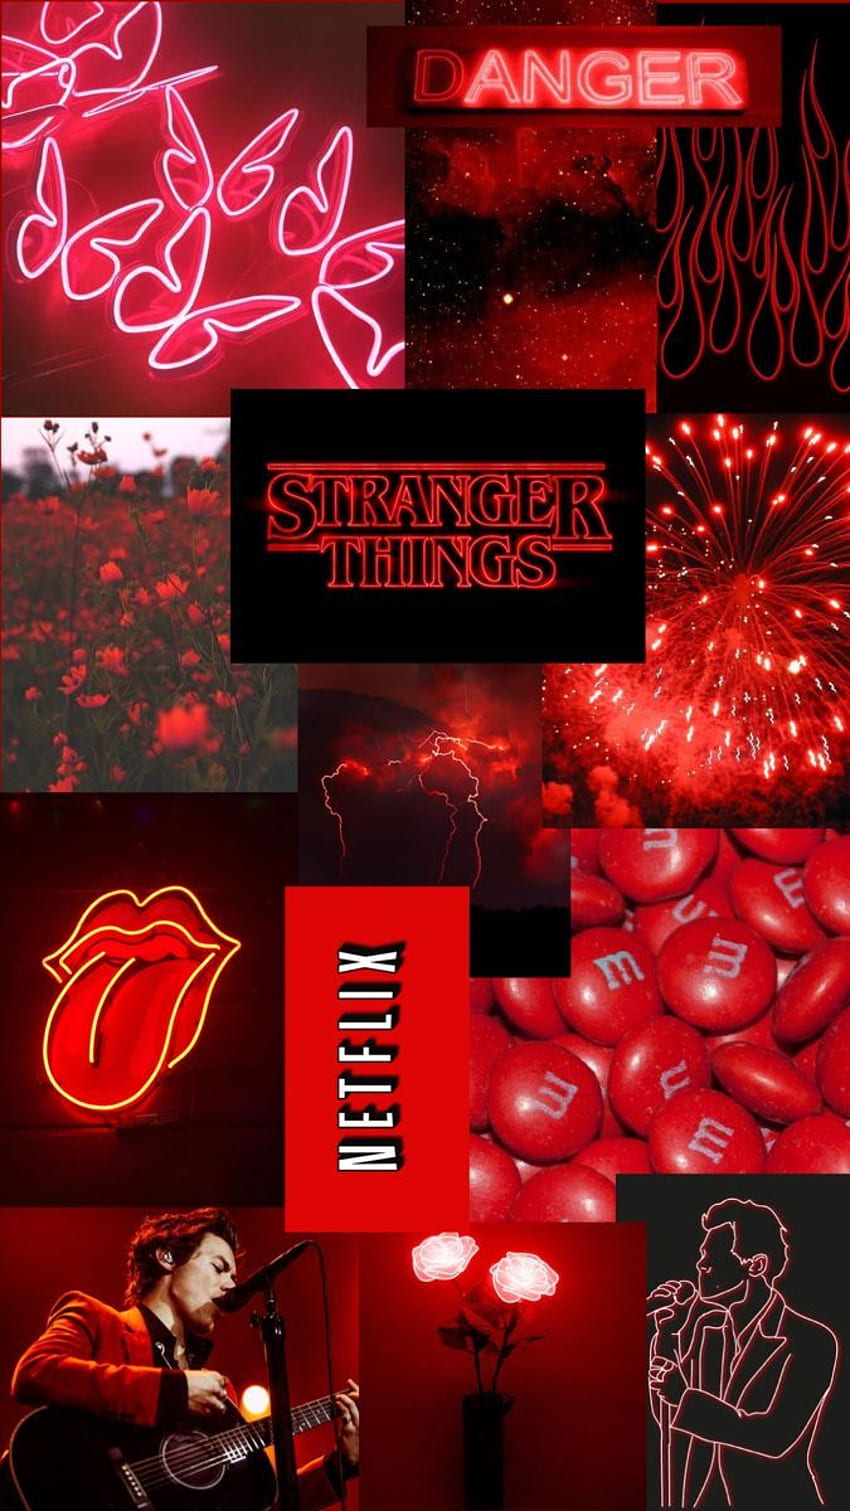 1920x1080px, 1080P Free download | Red Aesthetic Collage in 2021. Red ...